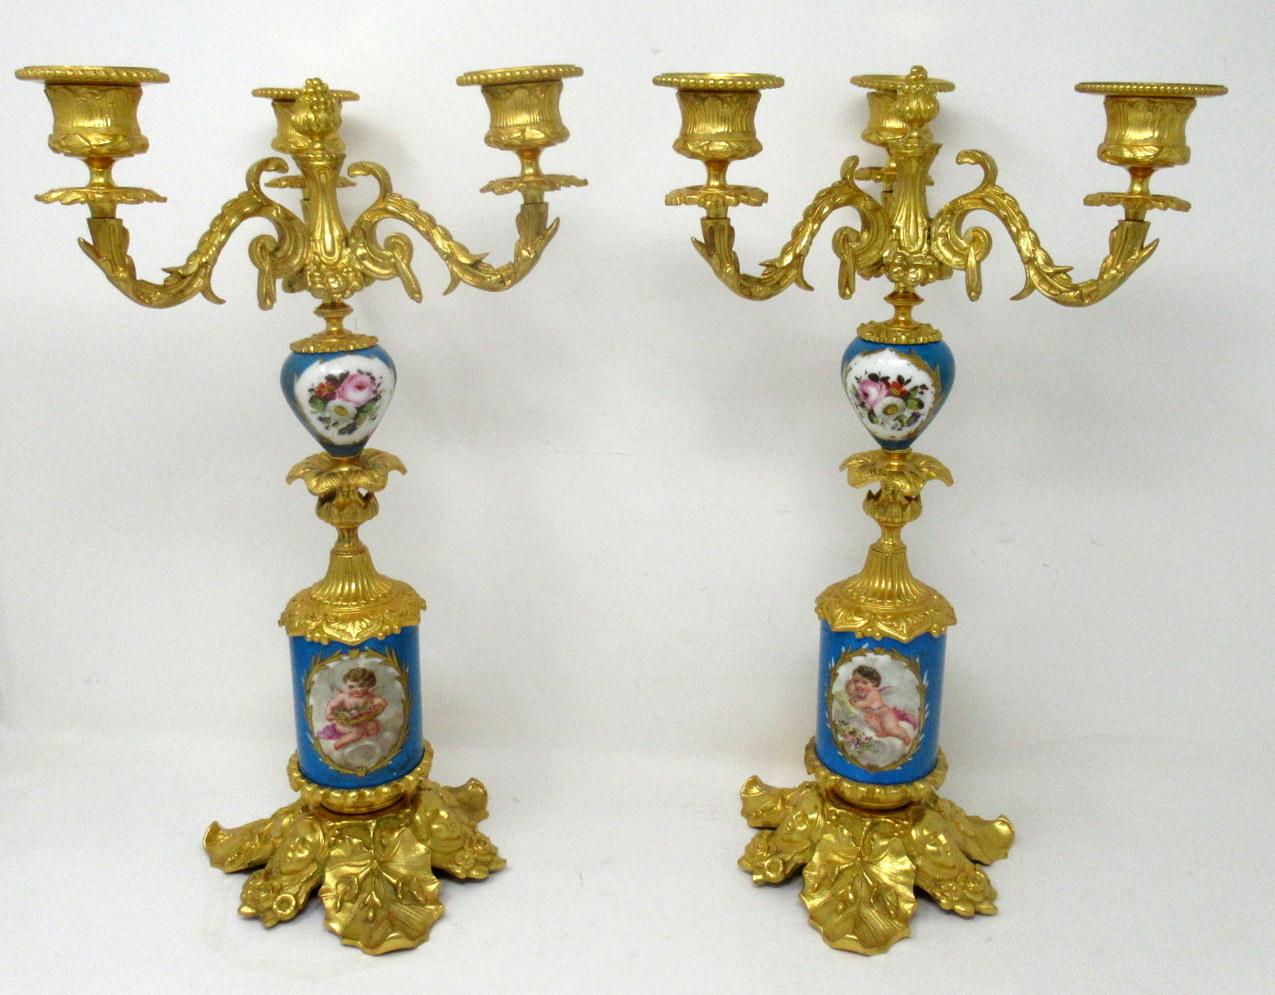 A Fine Stylish and Imposing Pair of French Three Light Table or Mantle Sevres Porcelain Ormolu Mounted Candelabra of outstanding quality. Mid to late Nineteenth Century. 

Each with three scrolling branches above two porcelain hand decorated Celeste